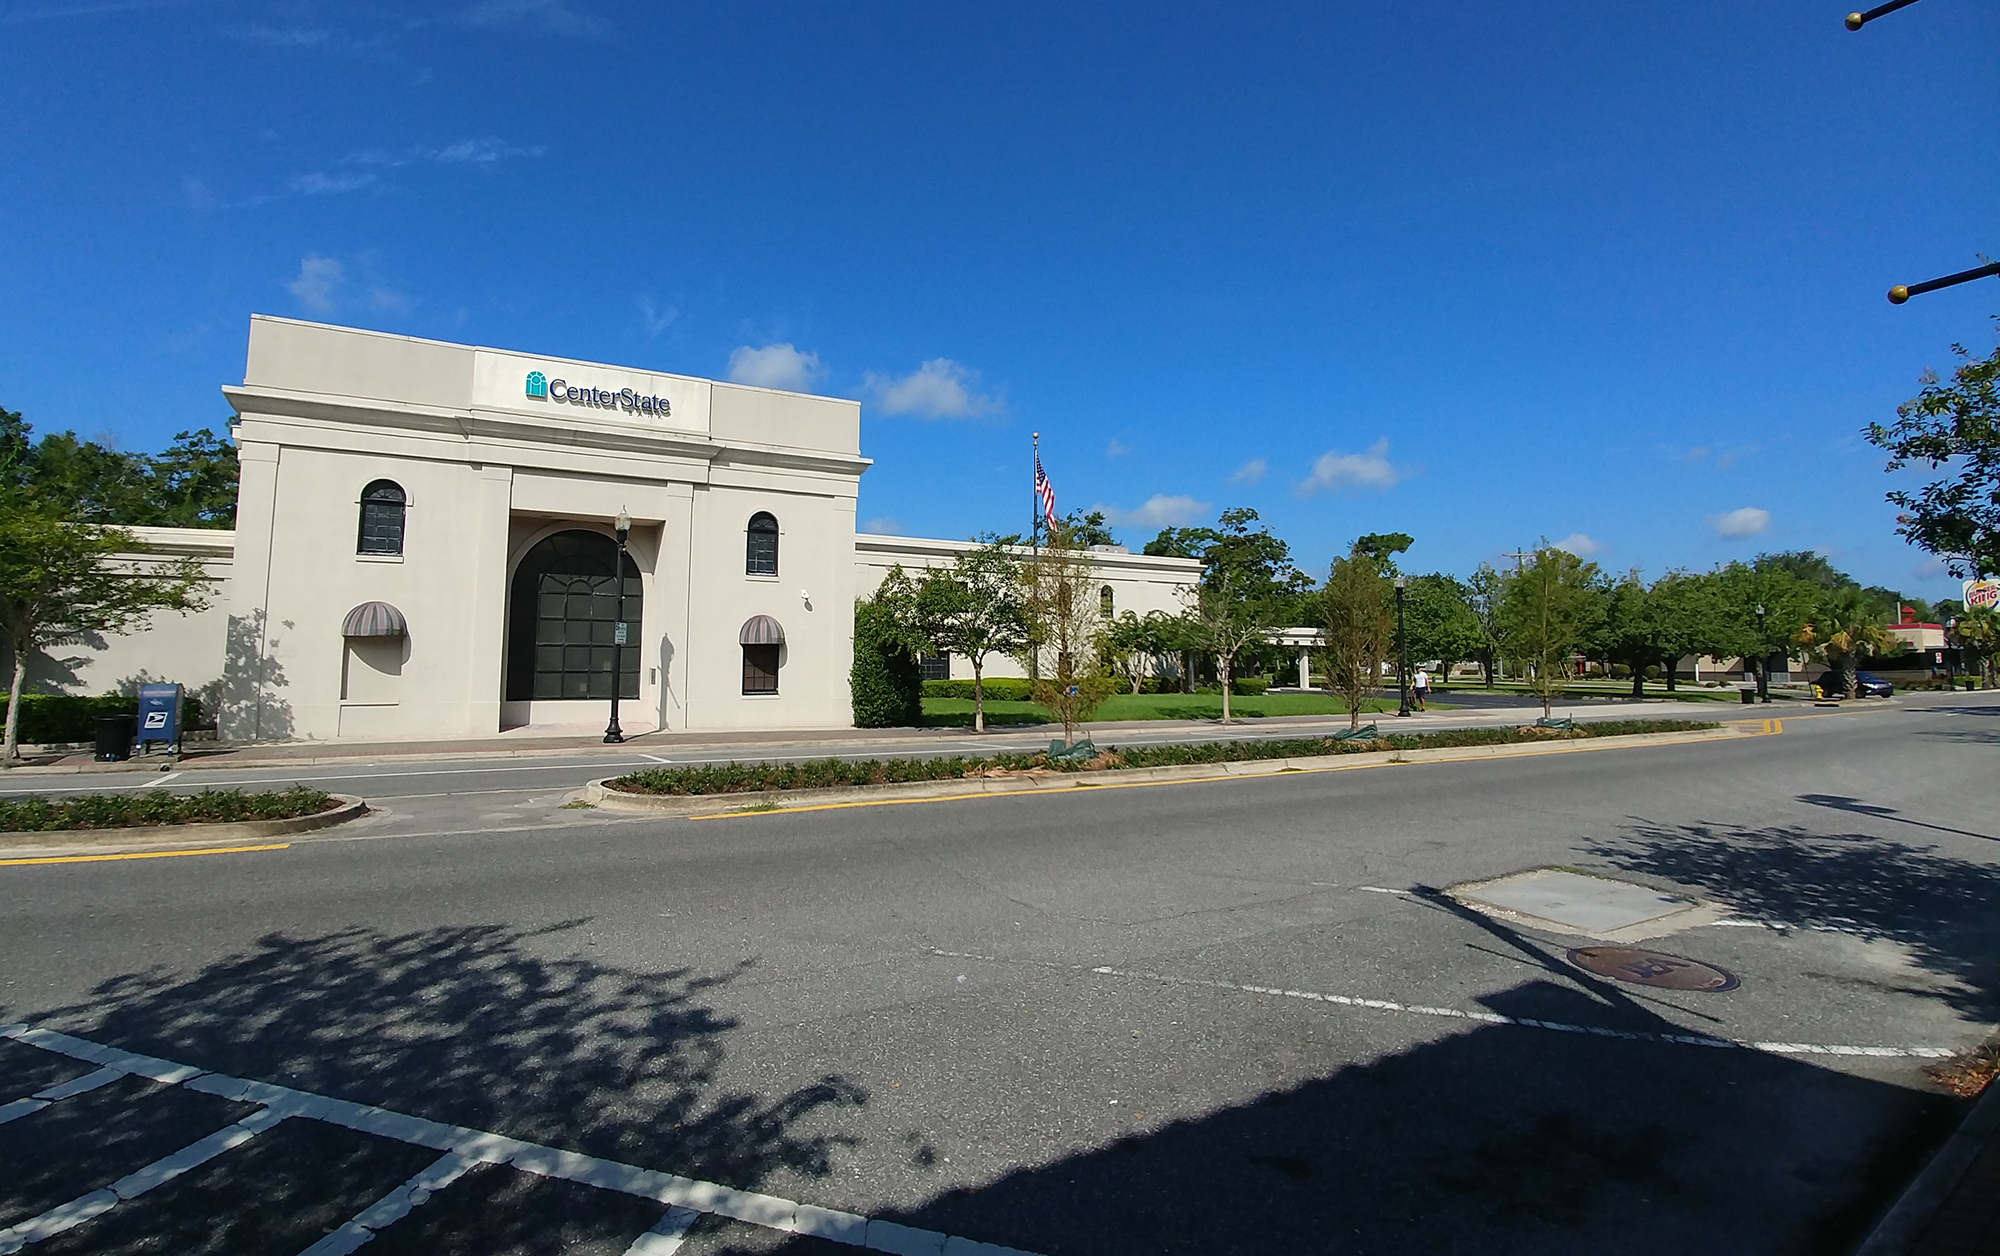 CenterState Bank of Florida received a certificate of appropriateness to demolish their existing 28,215-square-foot bank building.